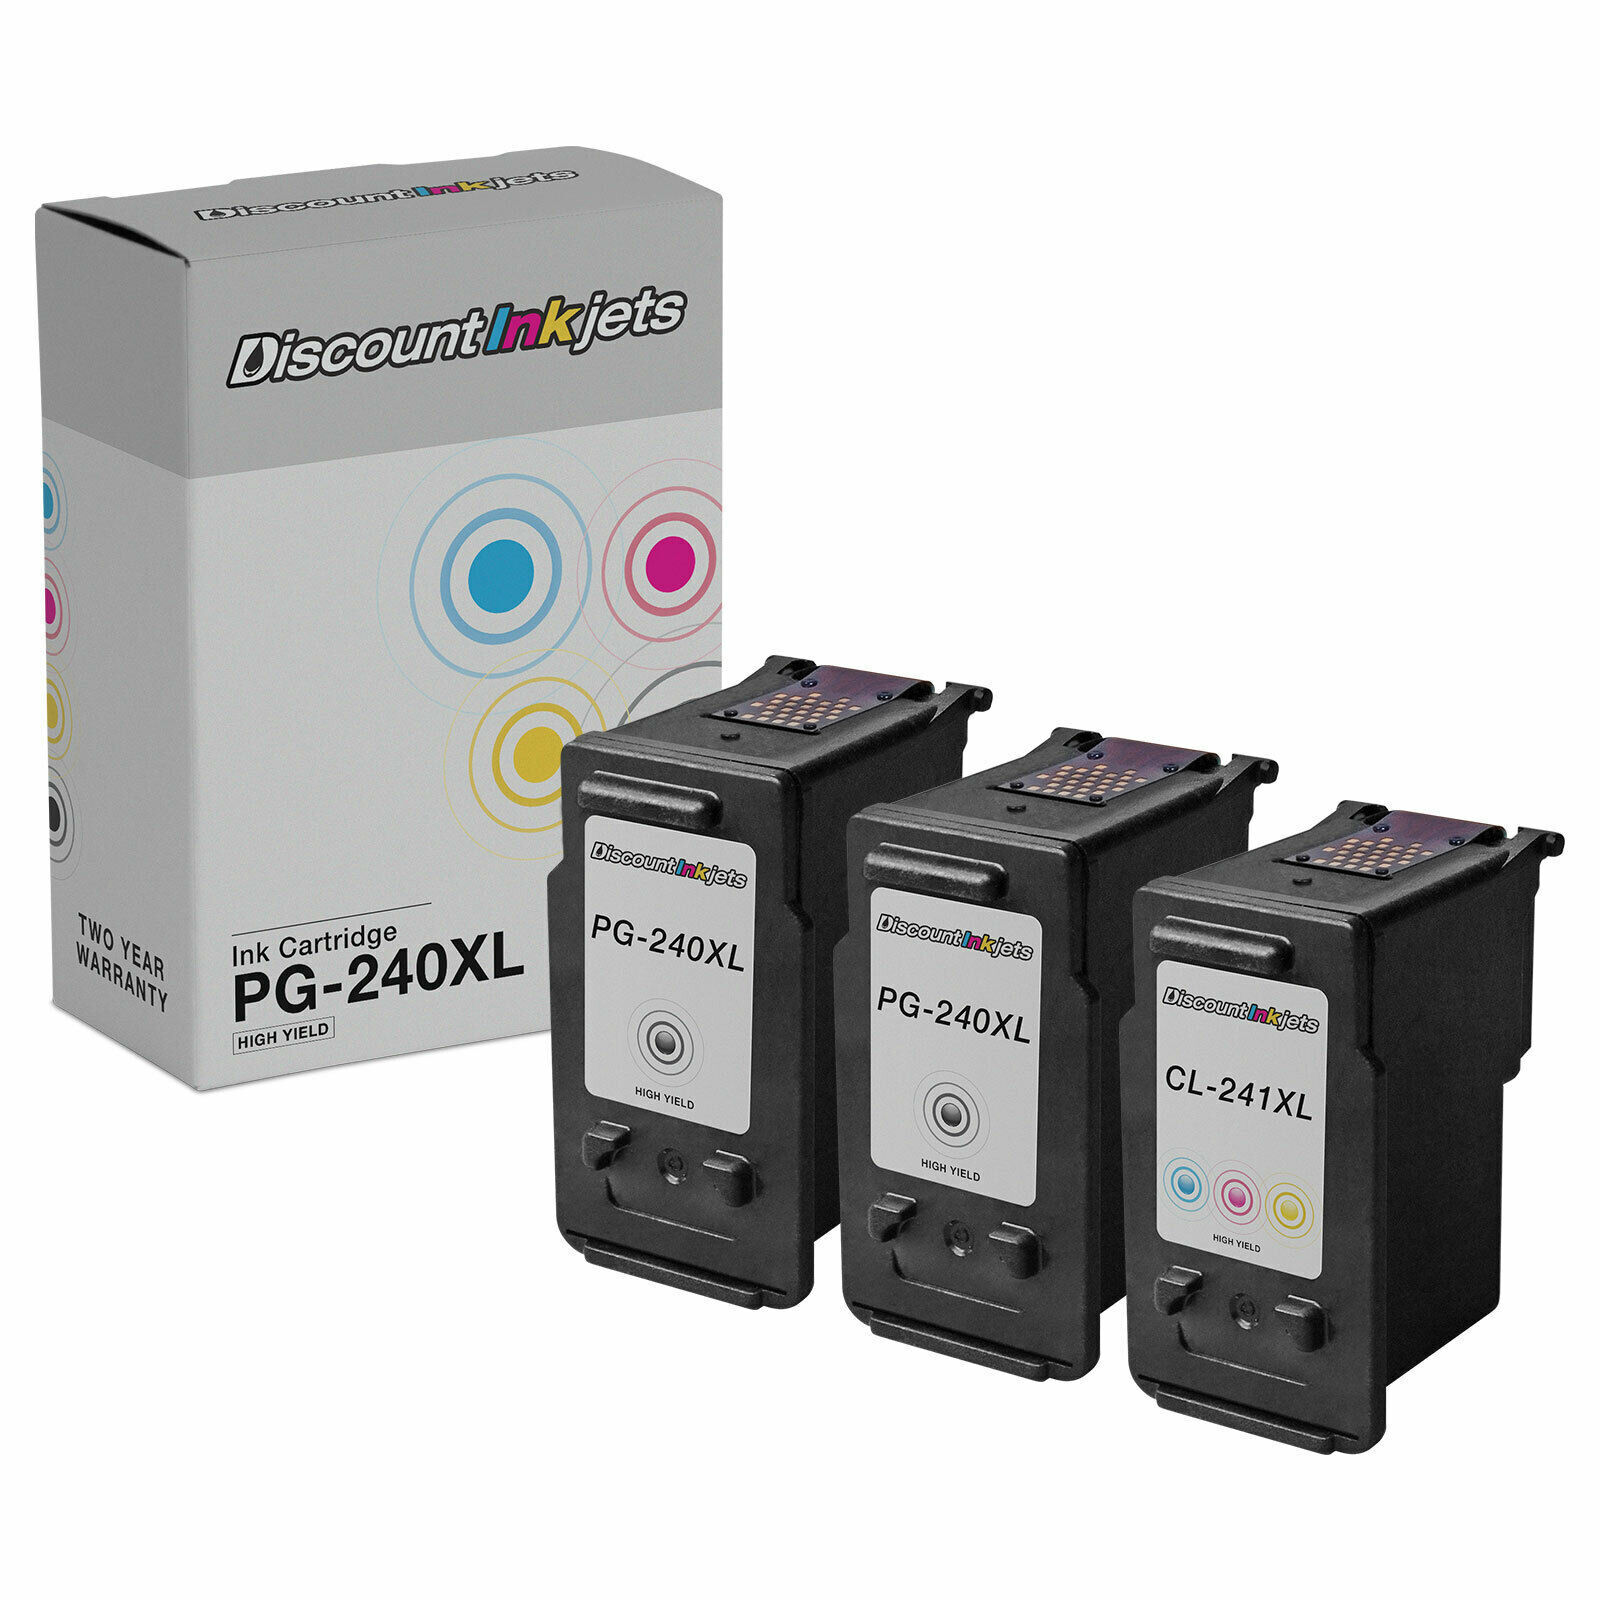 3PK PG-240XL CL-241XL Inkjet Cartridge for Canon PIXMA MG and MX Series Printers